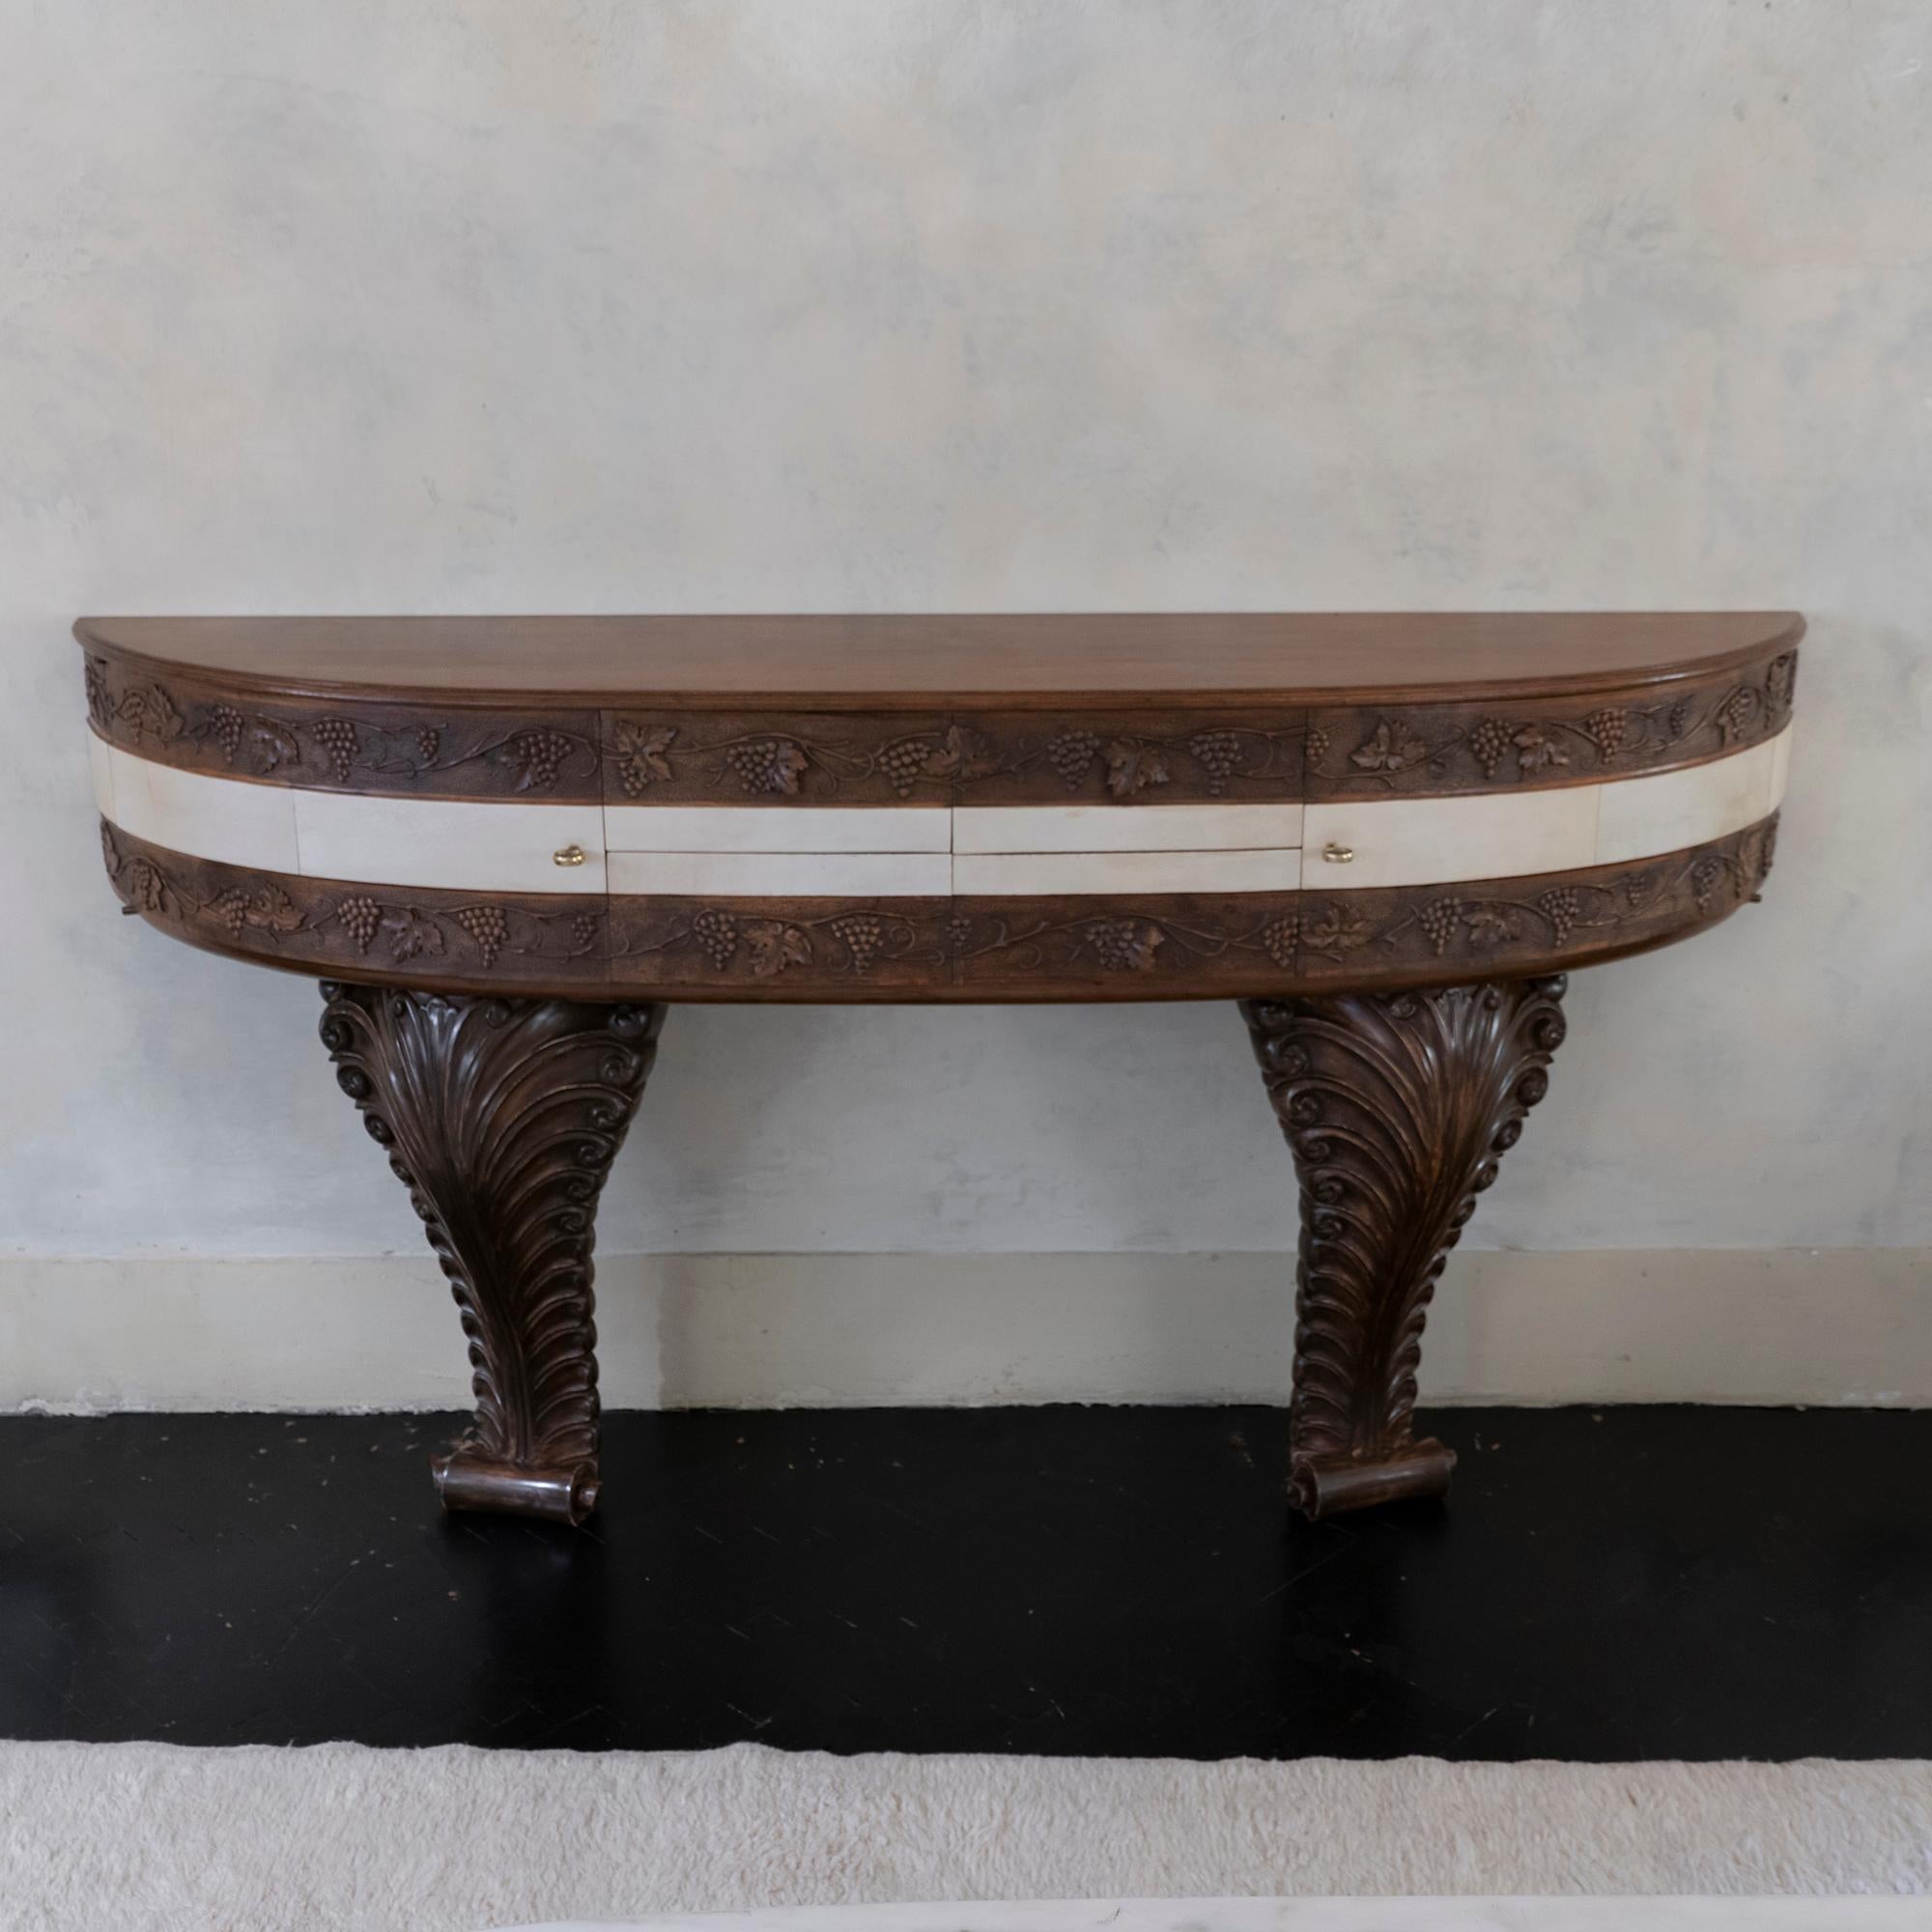 Mid-20th century monumental console in carved wood with decoration of bunches of grapes in the upper part with parchment details, four drawers and two sides sections, inlaid supports,original brass hardware, the console needs to be fixed to the